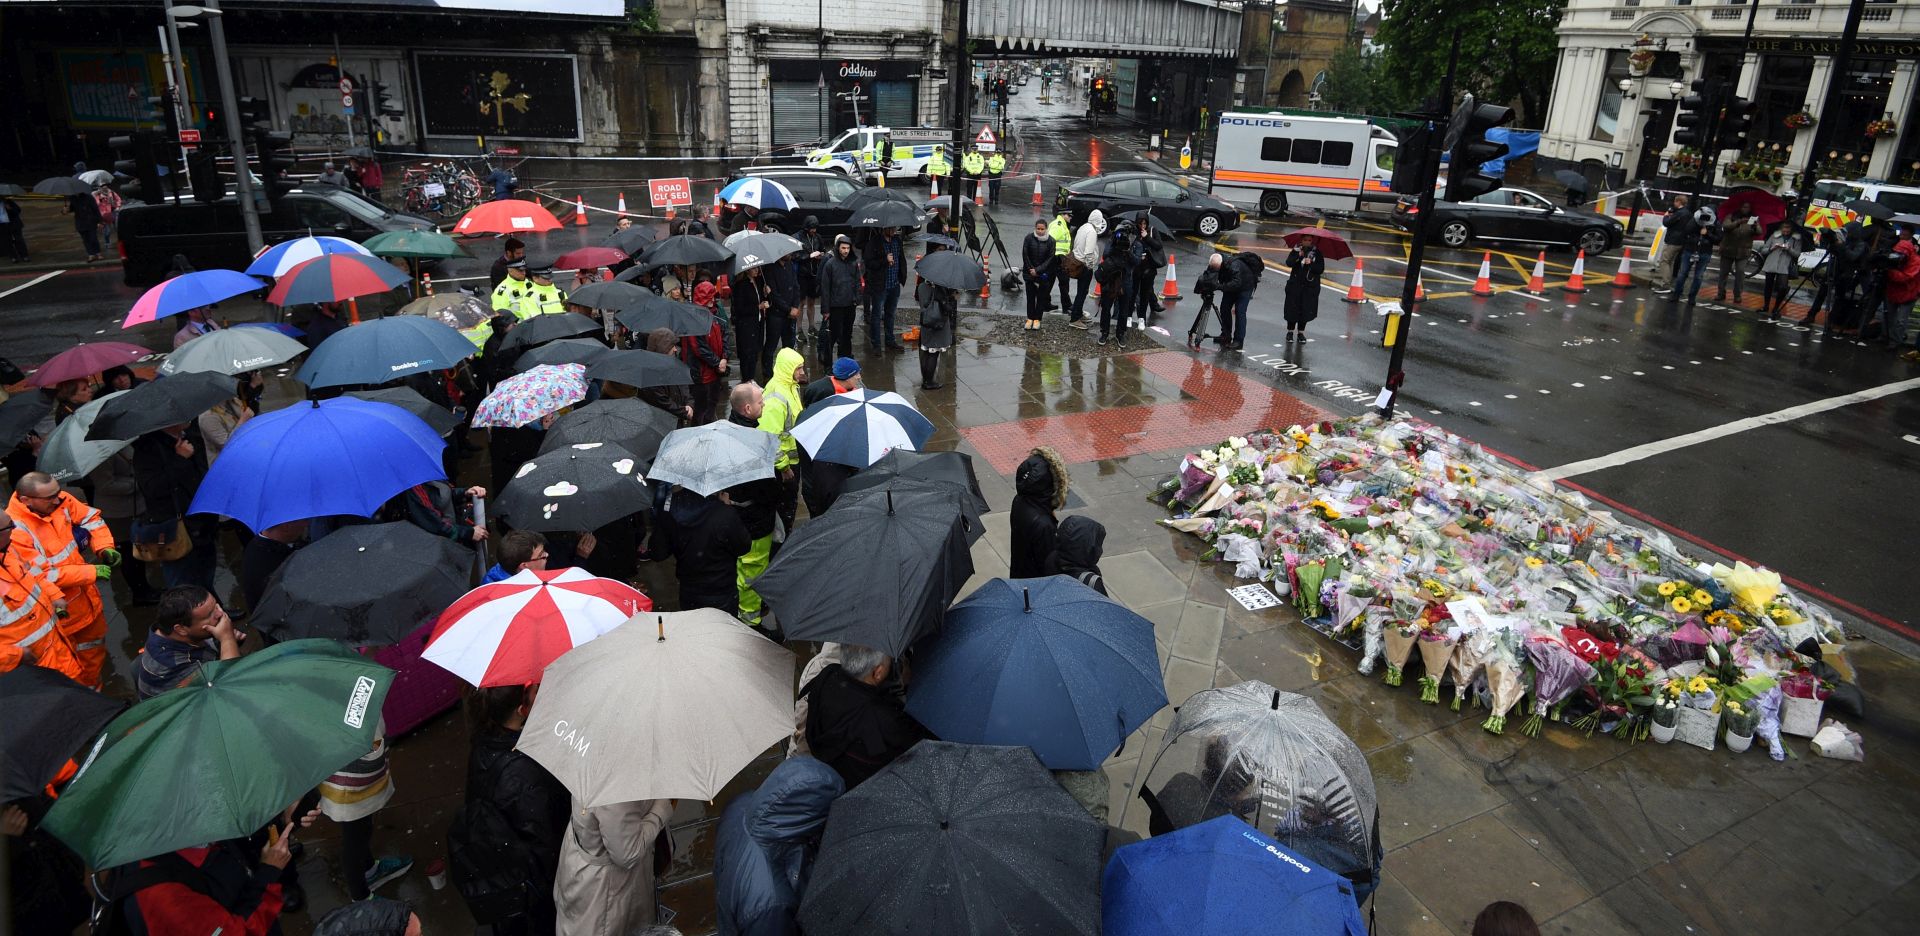 epa06012886 Members of the public observe a minute's silence for the victims of the London Bridge terror attacks on London Bridge, close to Borough Market in London, Britain, 06 June 2017. Seven people have lost their lives and 48 people have been injured after three attackers drove a van into crowds on London Bridge and then went on a stabbing rampage. The three attackers wearing fake suicide vests were shot dead by police who are treating the attack as a 'terrorist incident'.  EPA/FACUNDO ARRIZABALAGA